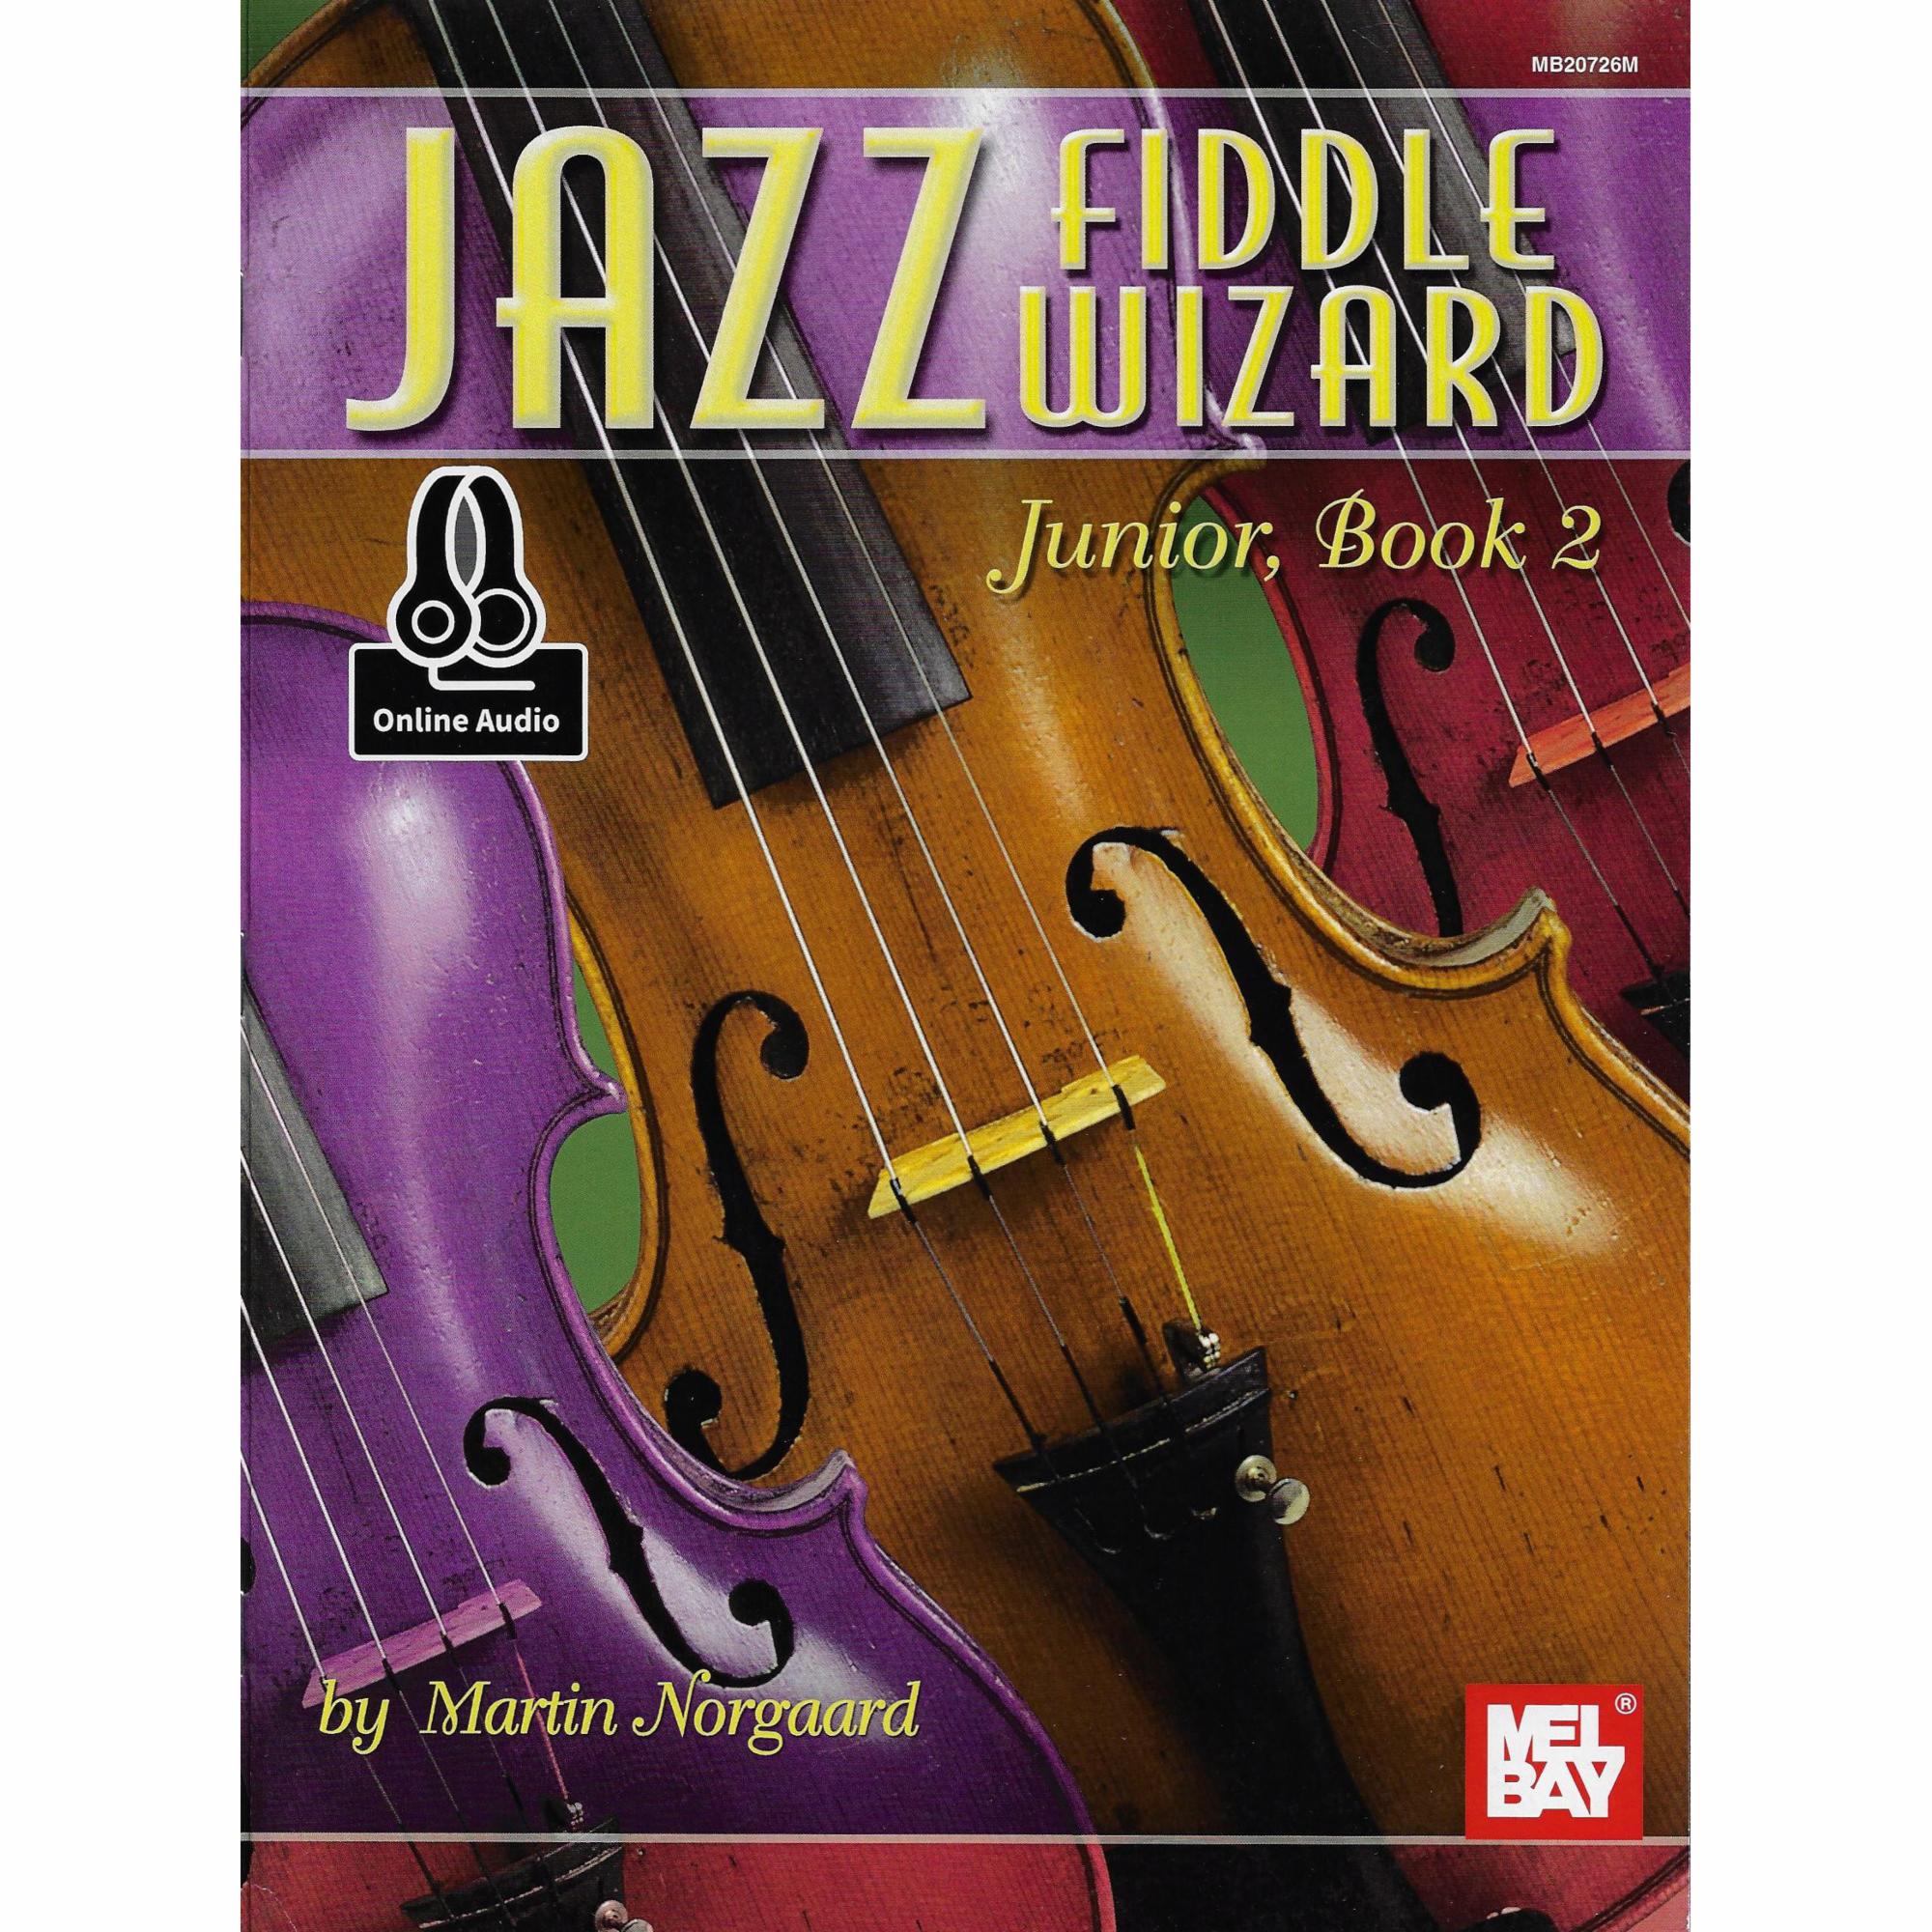 Jazz Fiddle Wizard Jr., Book 2 for Violin or Cello/Bass